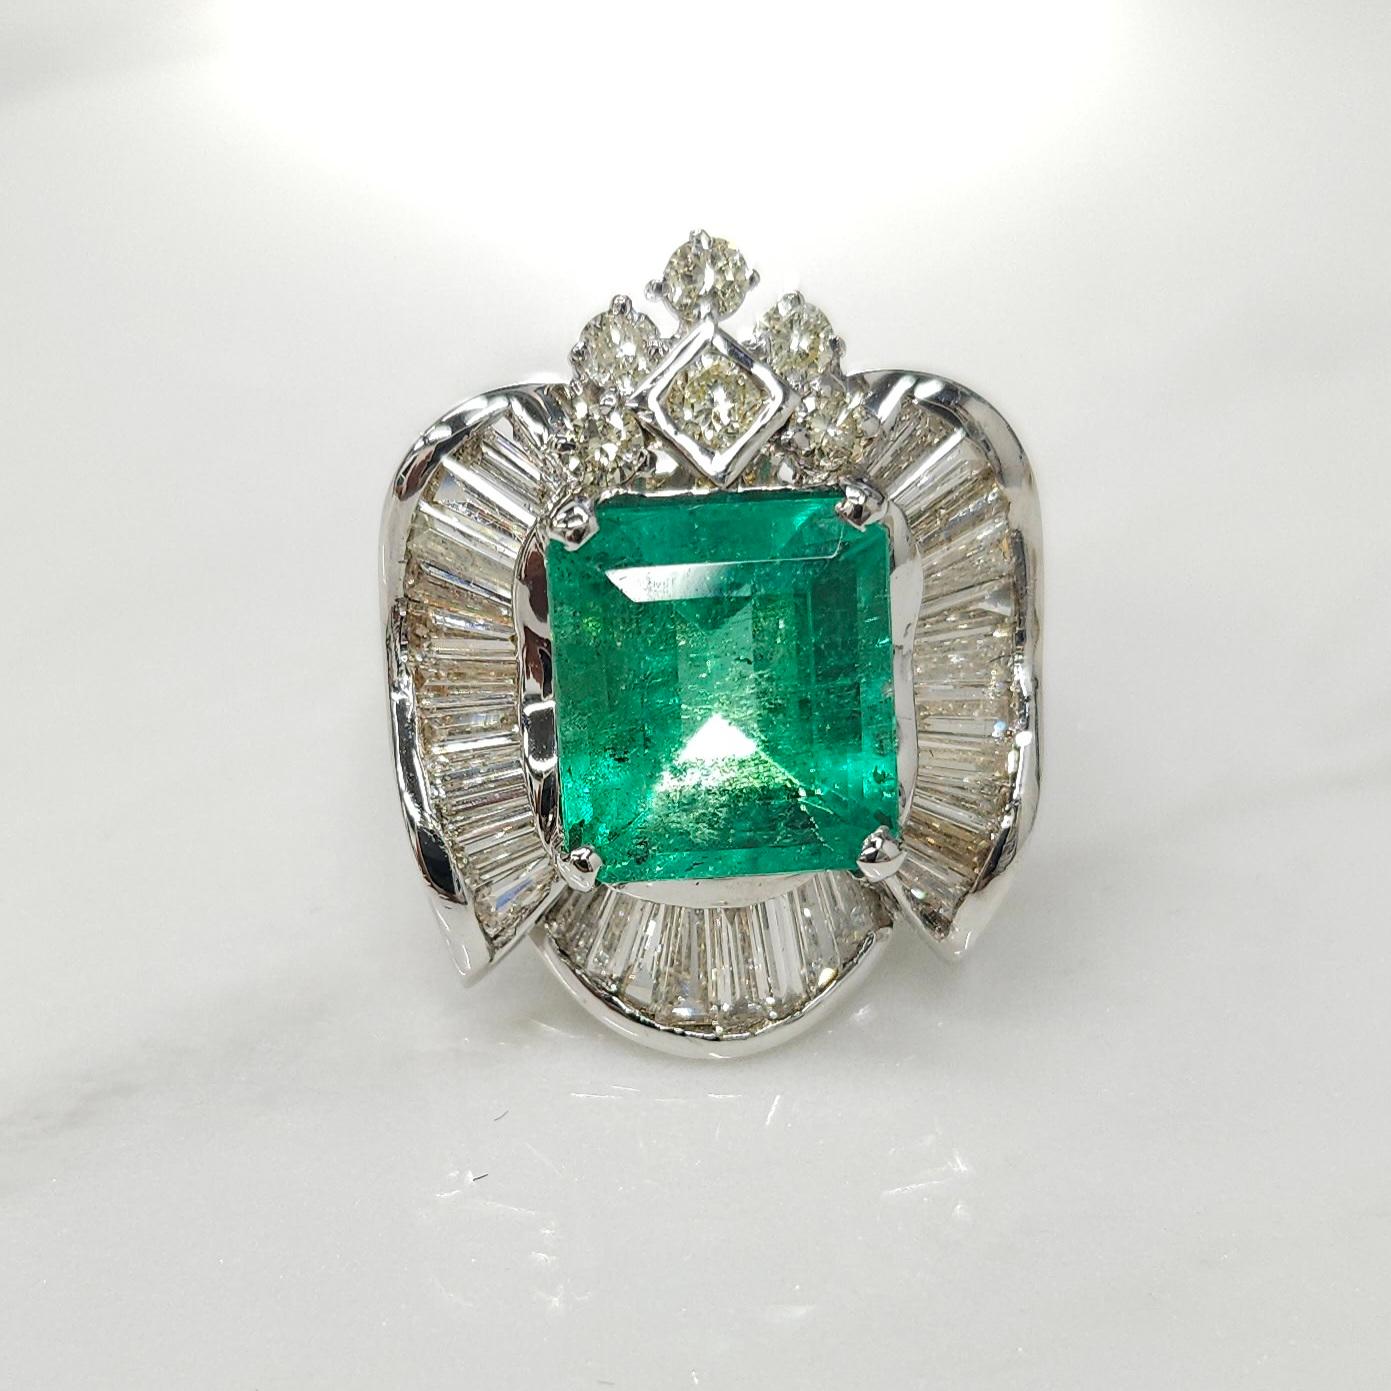 Introducing a stunning piece of jewelry that is sure to captivate and leave a lasting impression - the IGI Certified 3.92 Carat Colombian Emerald ring. This exquisite ring features an intense bluish green colored emerald, renowned for its